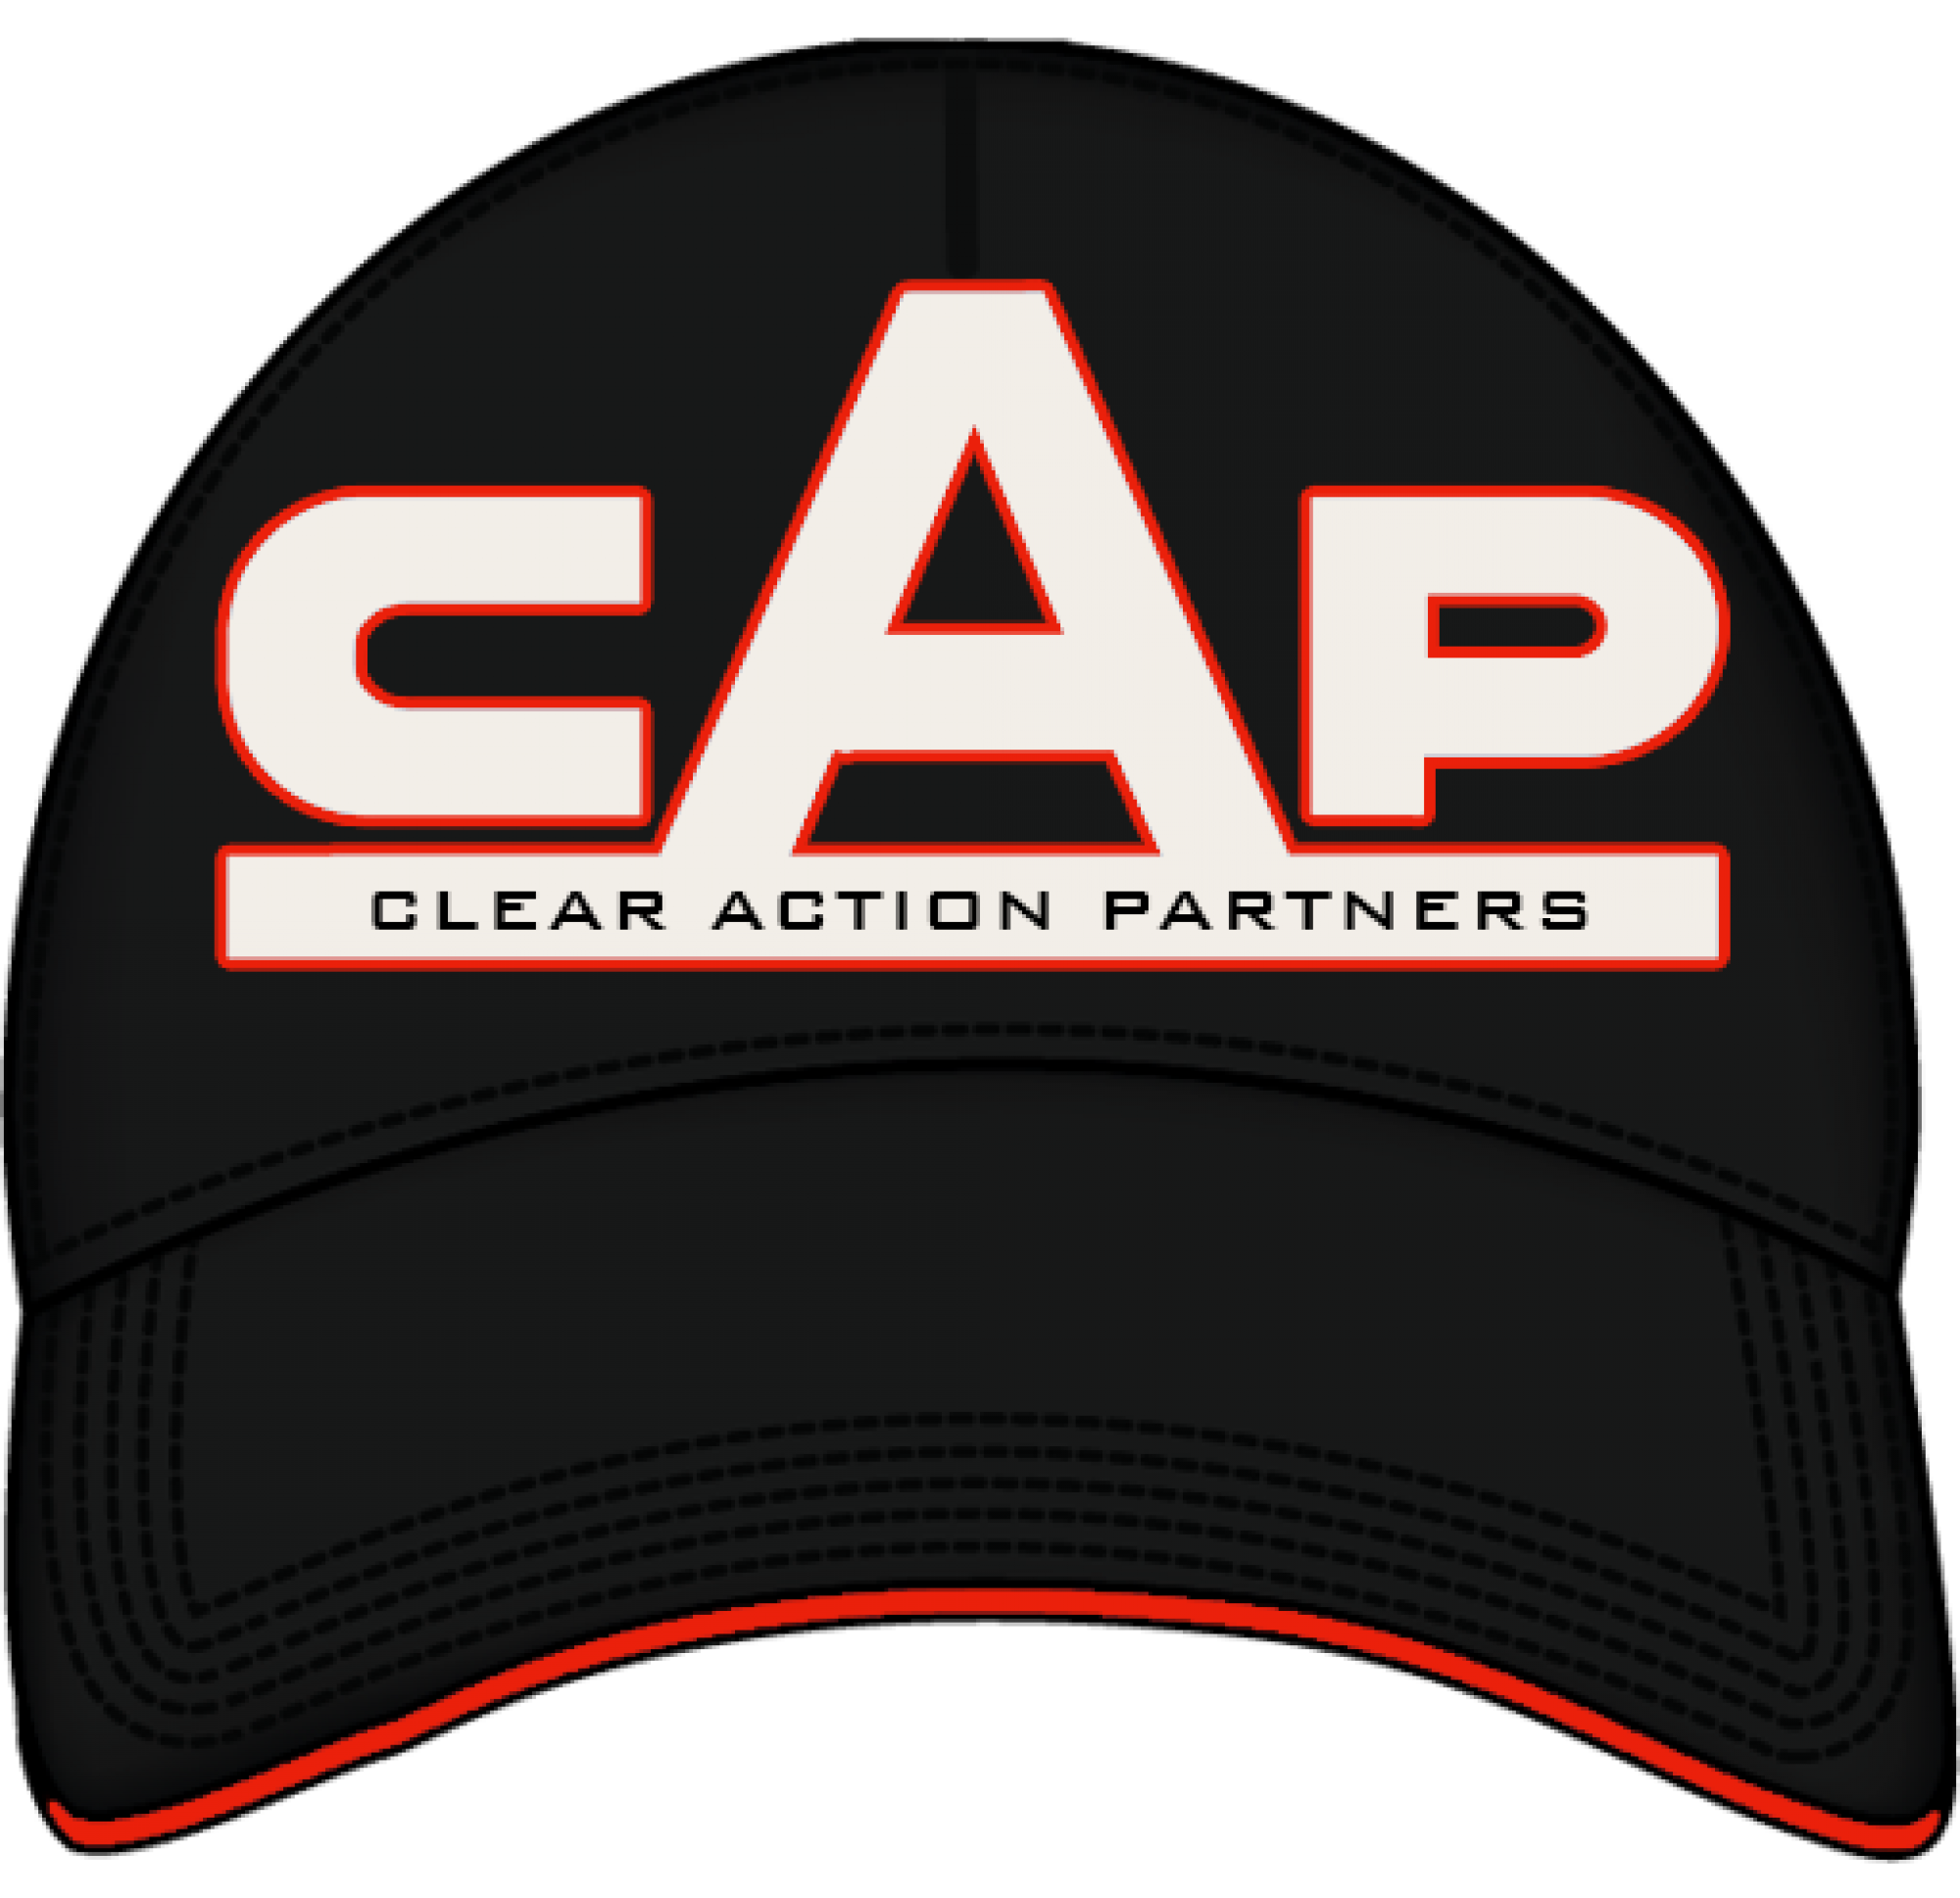 Clear Action Partners